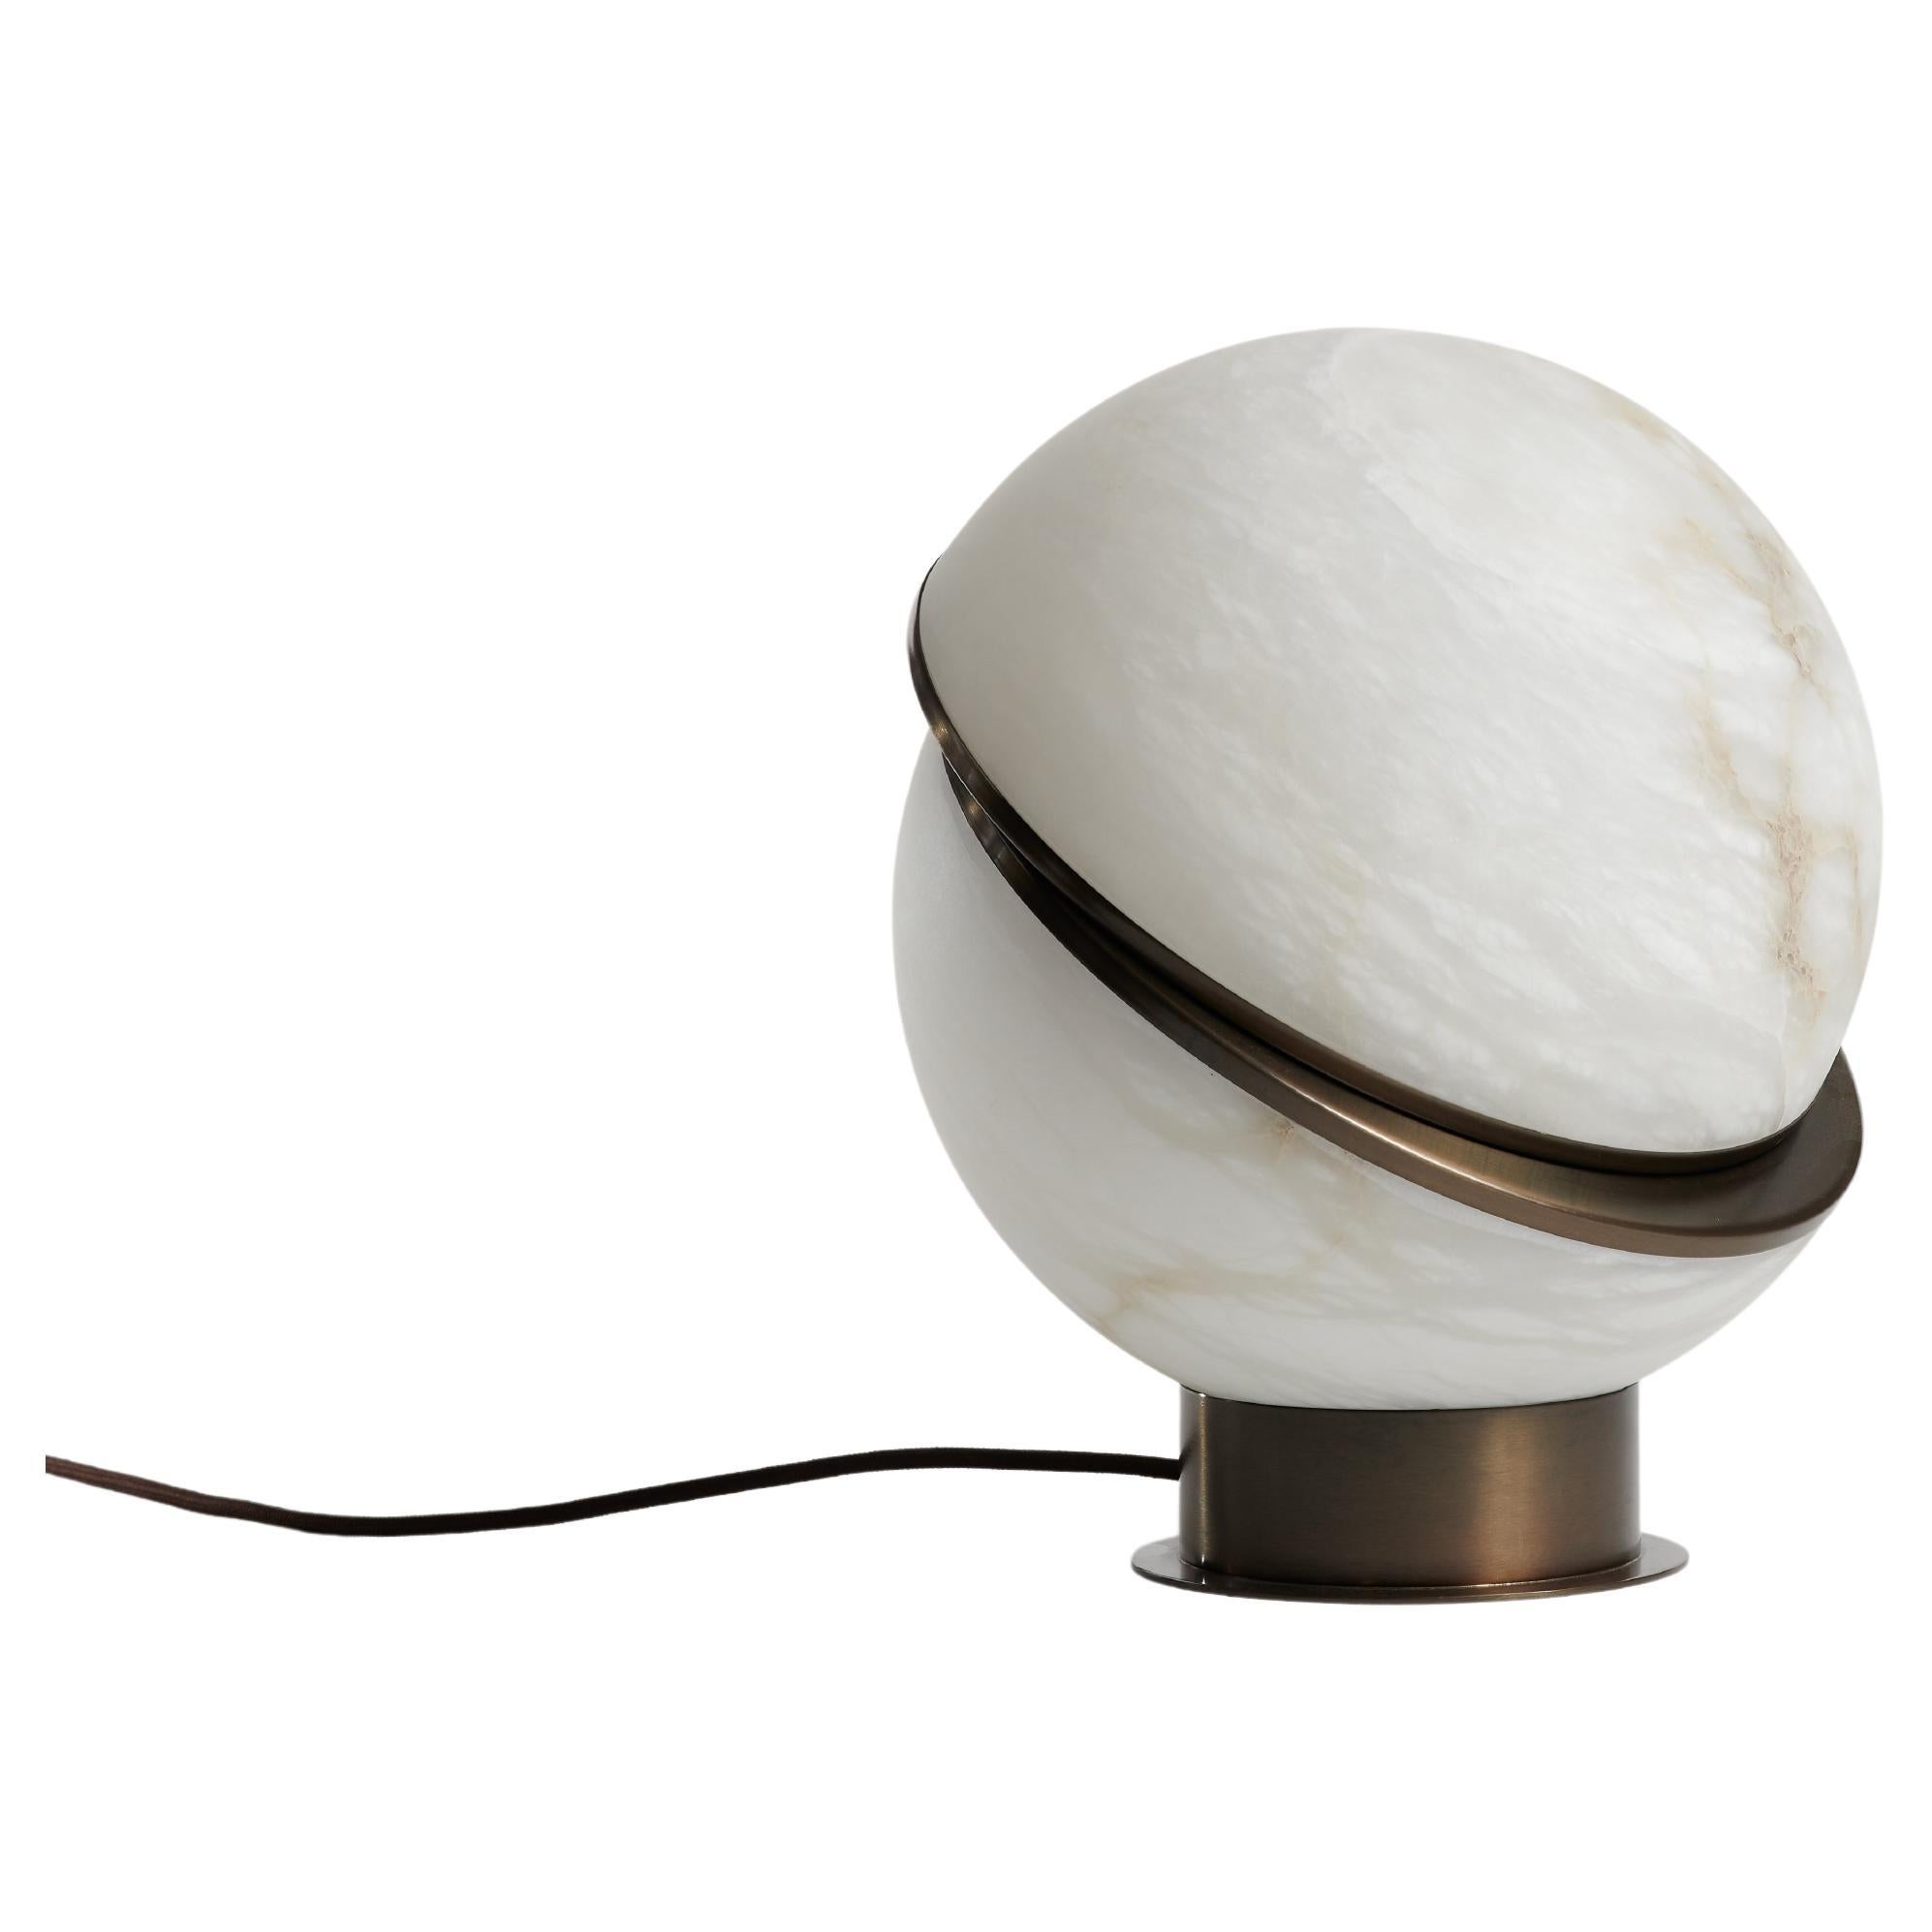 Modern Italian Ethereal Allure of Alabaster - Offset Globe Lamp in bronze For Sale